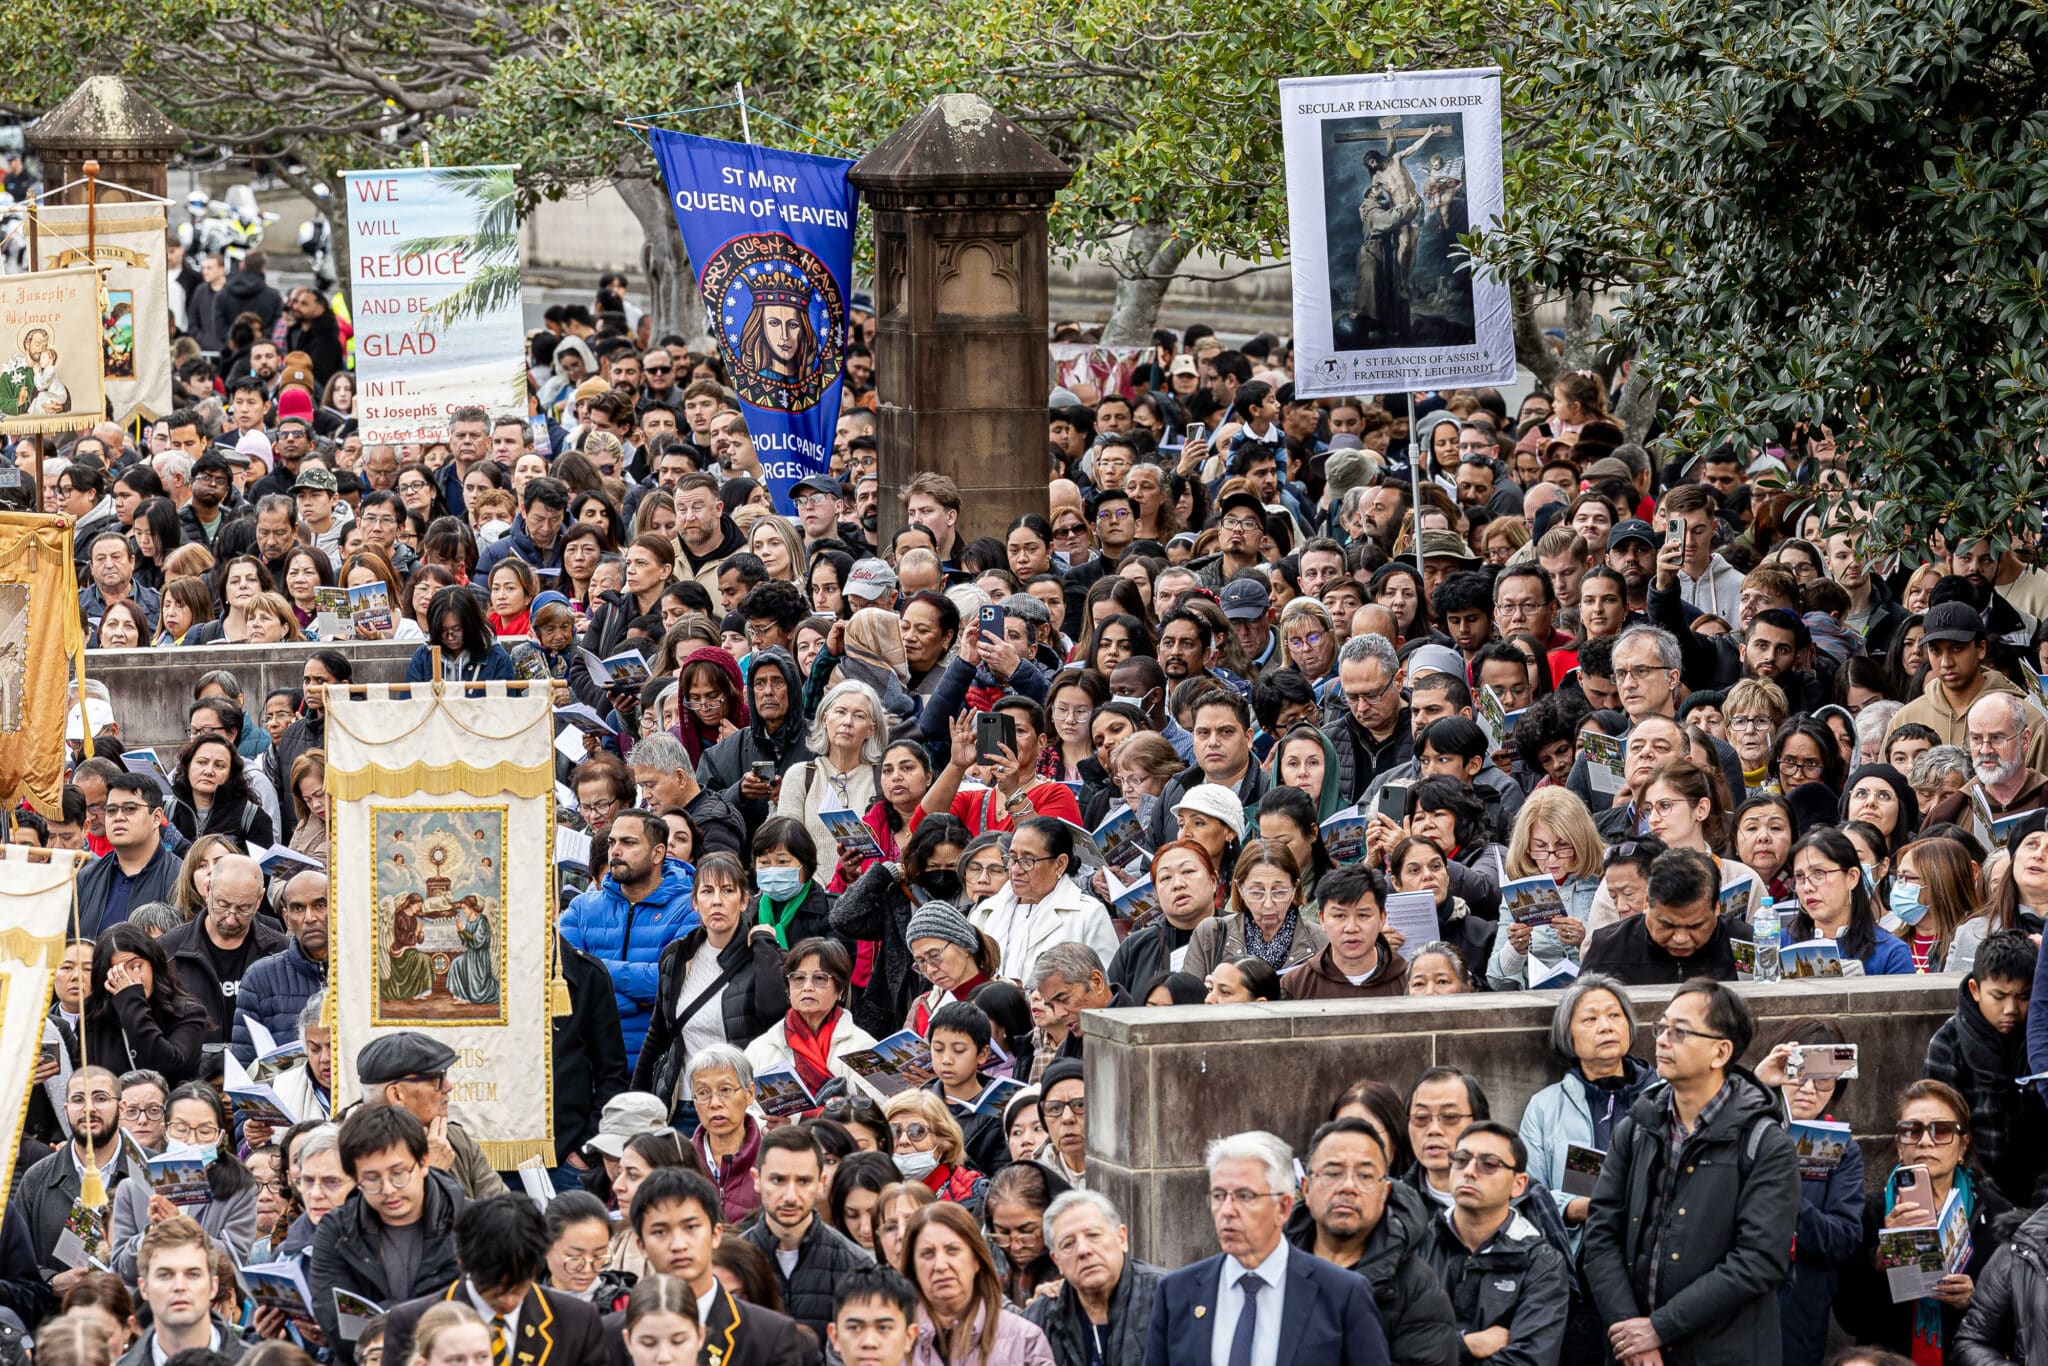 Walk with Christ procession - The Catholic Weekly